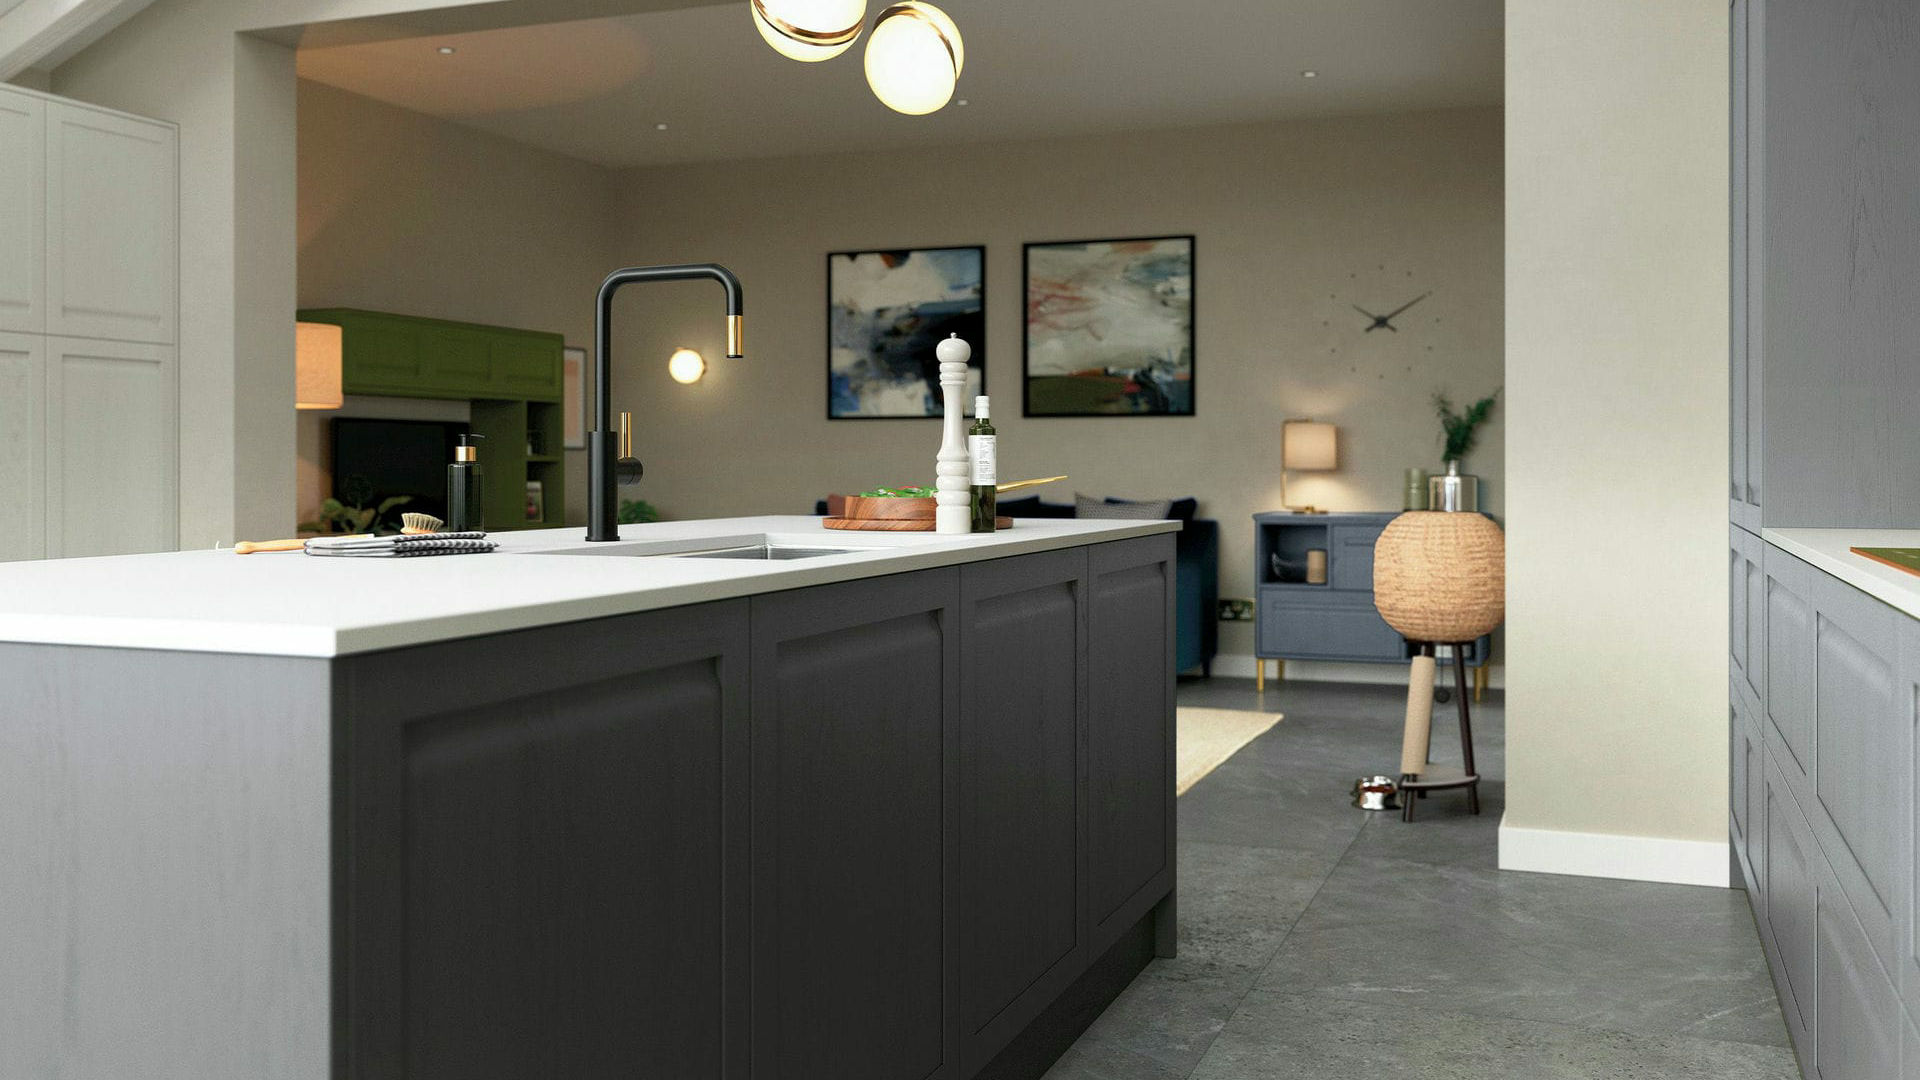 Handleless solid wood dust grey kitchens merging the warmth of wood with a modern dust grey tone